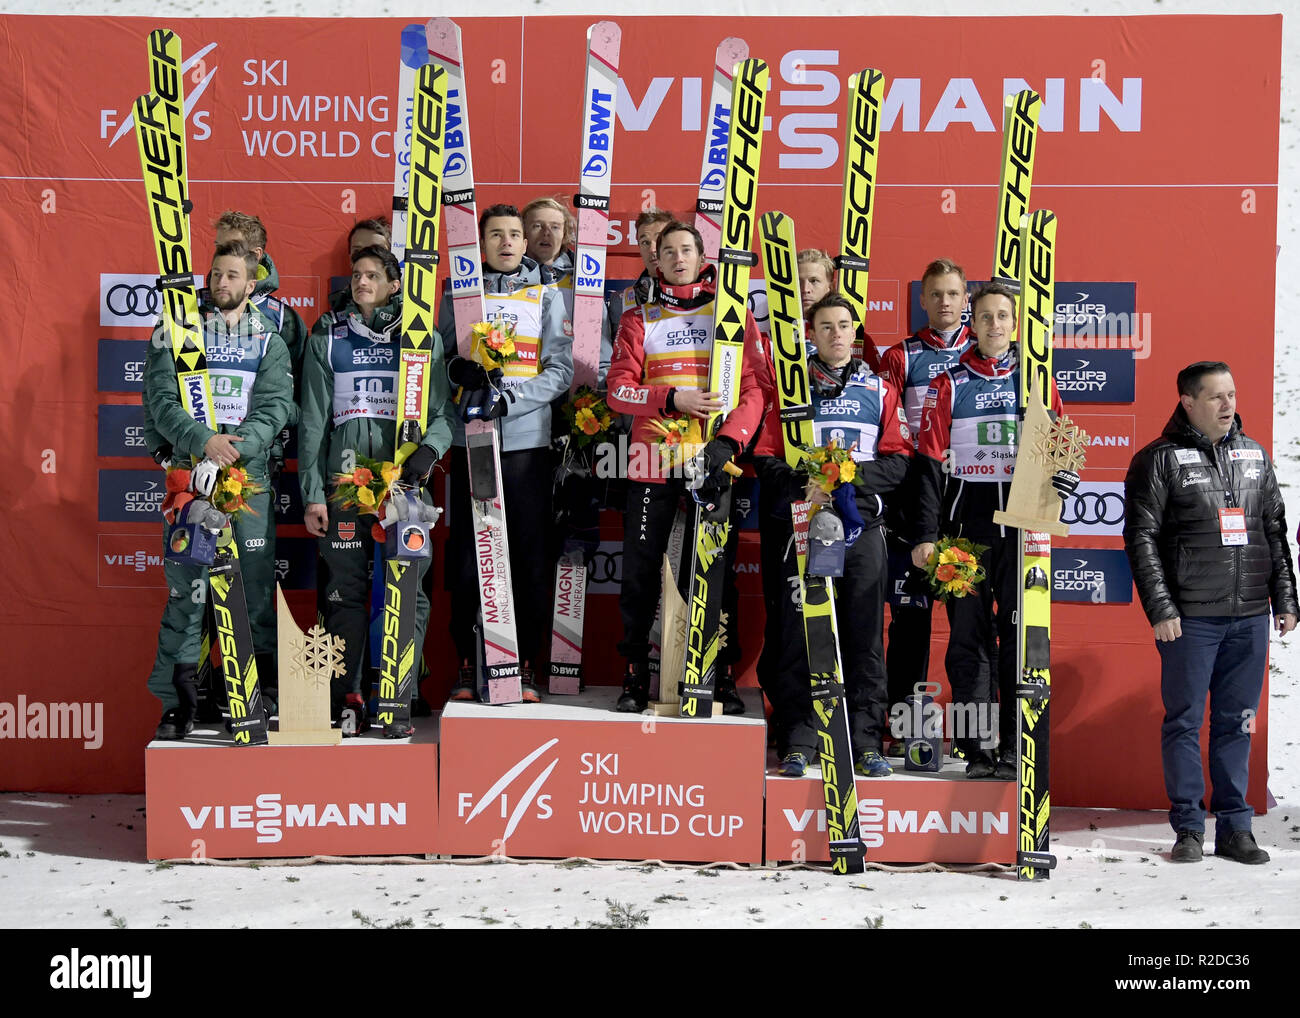 Poland wins the first team competition of the season in ski jumping on November 17, 2018 in Wisla, Poland. Stock Photo